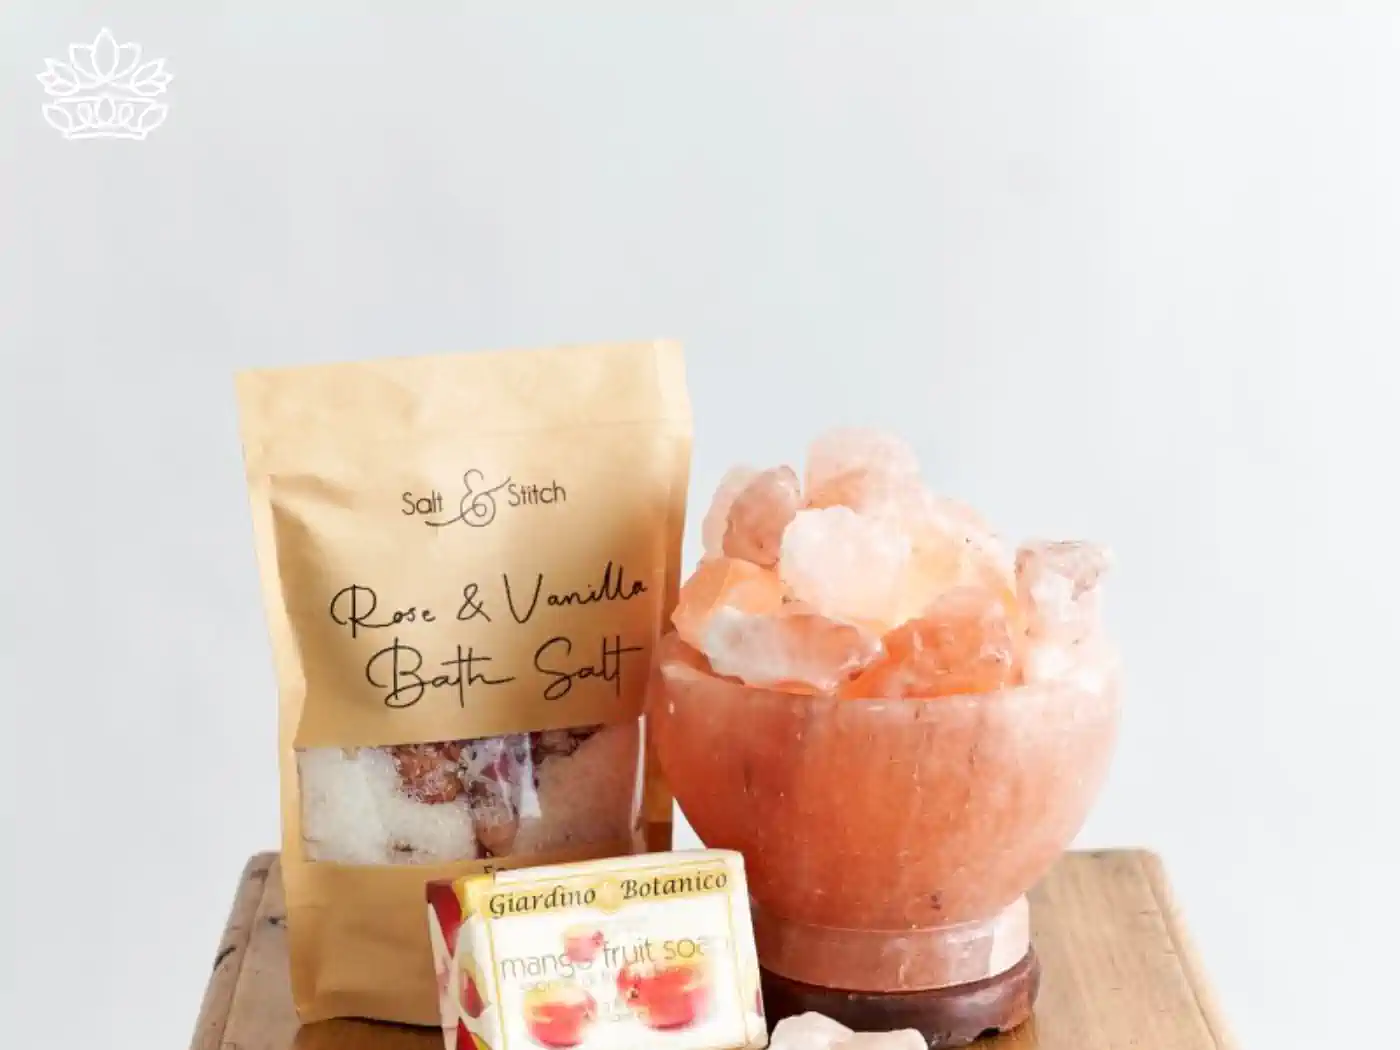 Elegant wellness setup featuring Rose & Vanilla bath salt and a bowl of Himalayan pink salt crystals alongside mango fruit soap. Fabulous Flowers and Gifts - Housewarming. Delivered with Heart